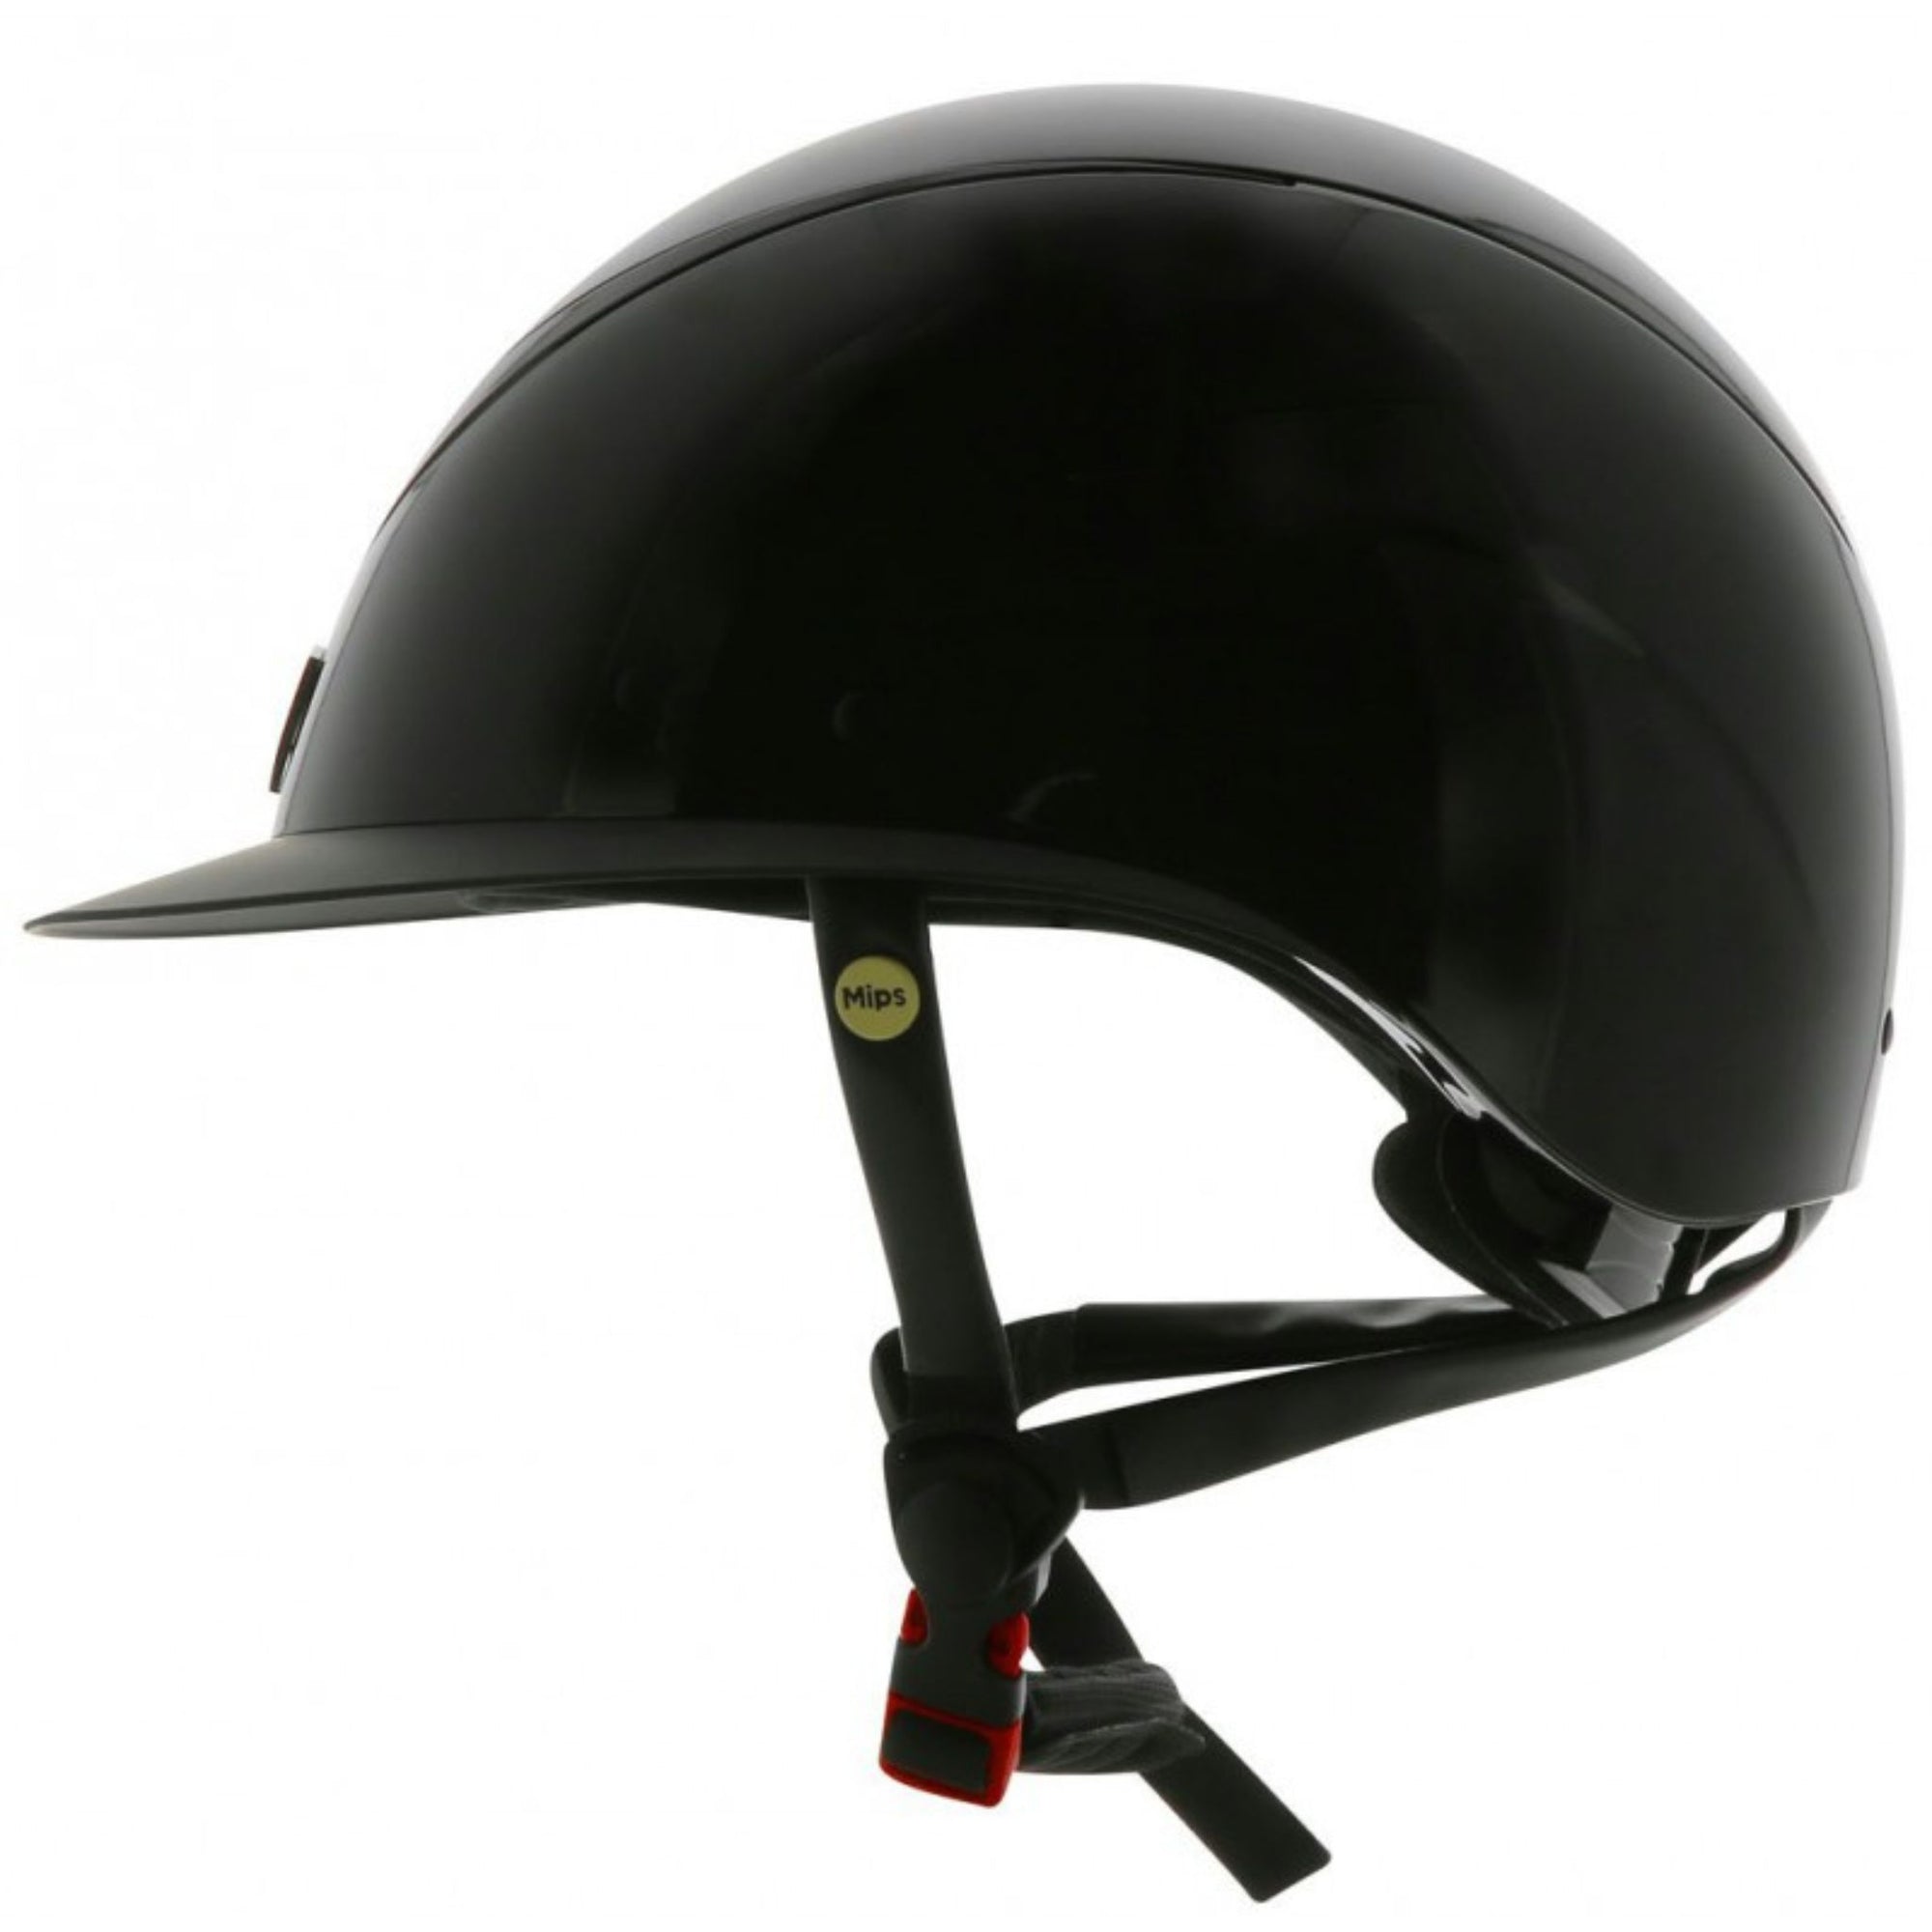 Shiny balck helmet with a wide brim and the Equitheme logo in the front middle